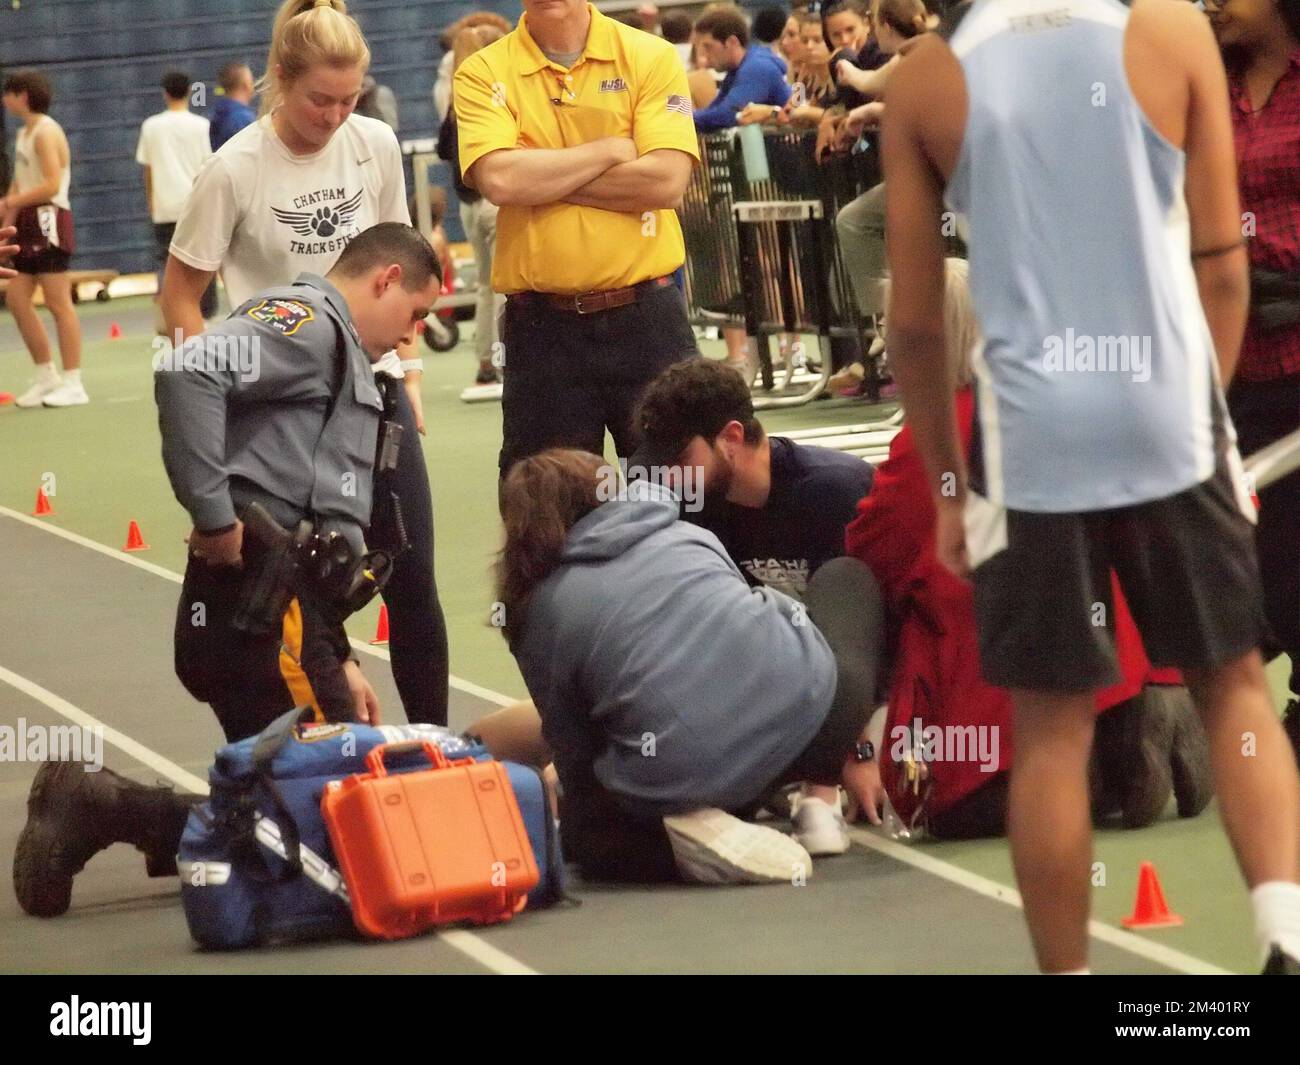 Runner at a New Jersey indoor track and field competition, collapses near finish line. First responders rendering aid to the teen male. Stock Photo